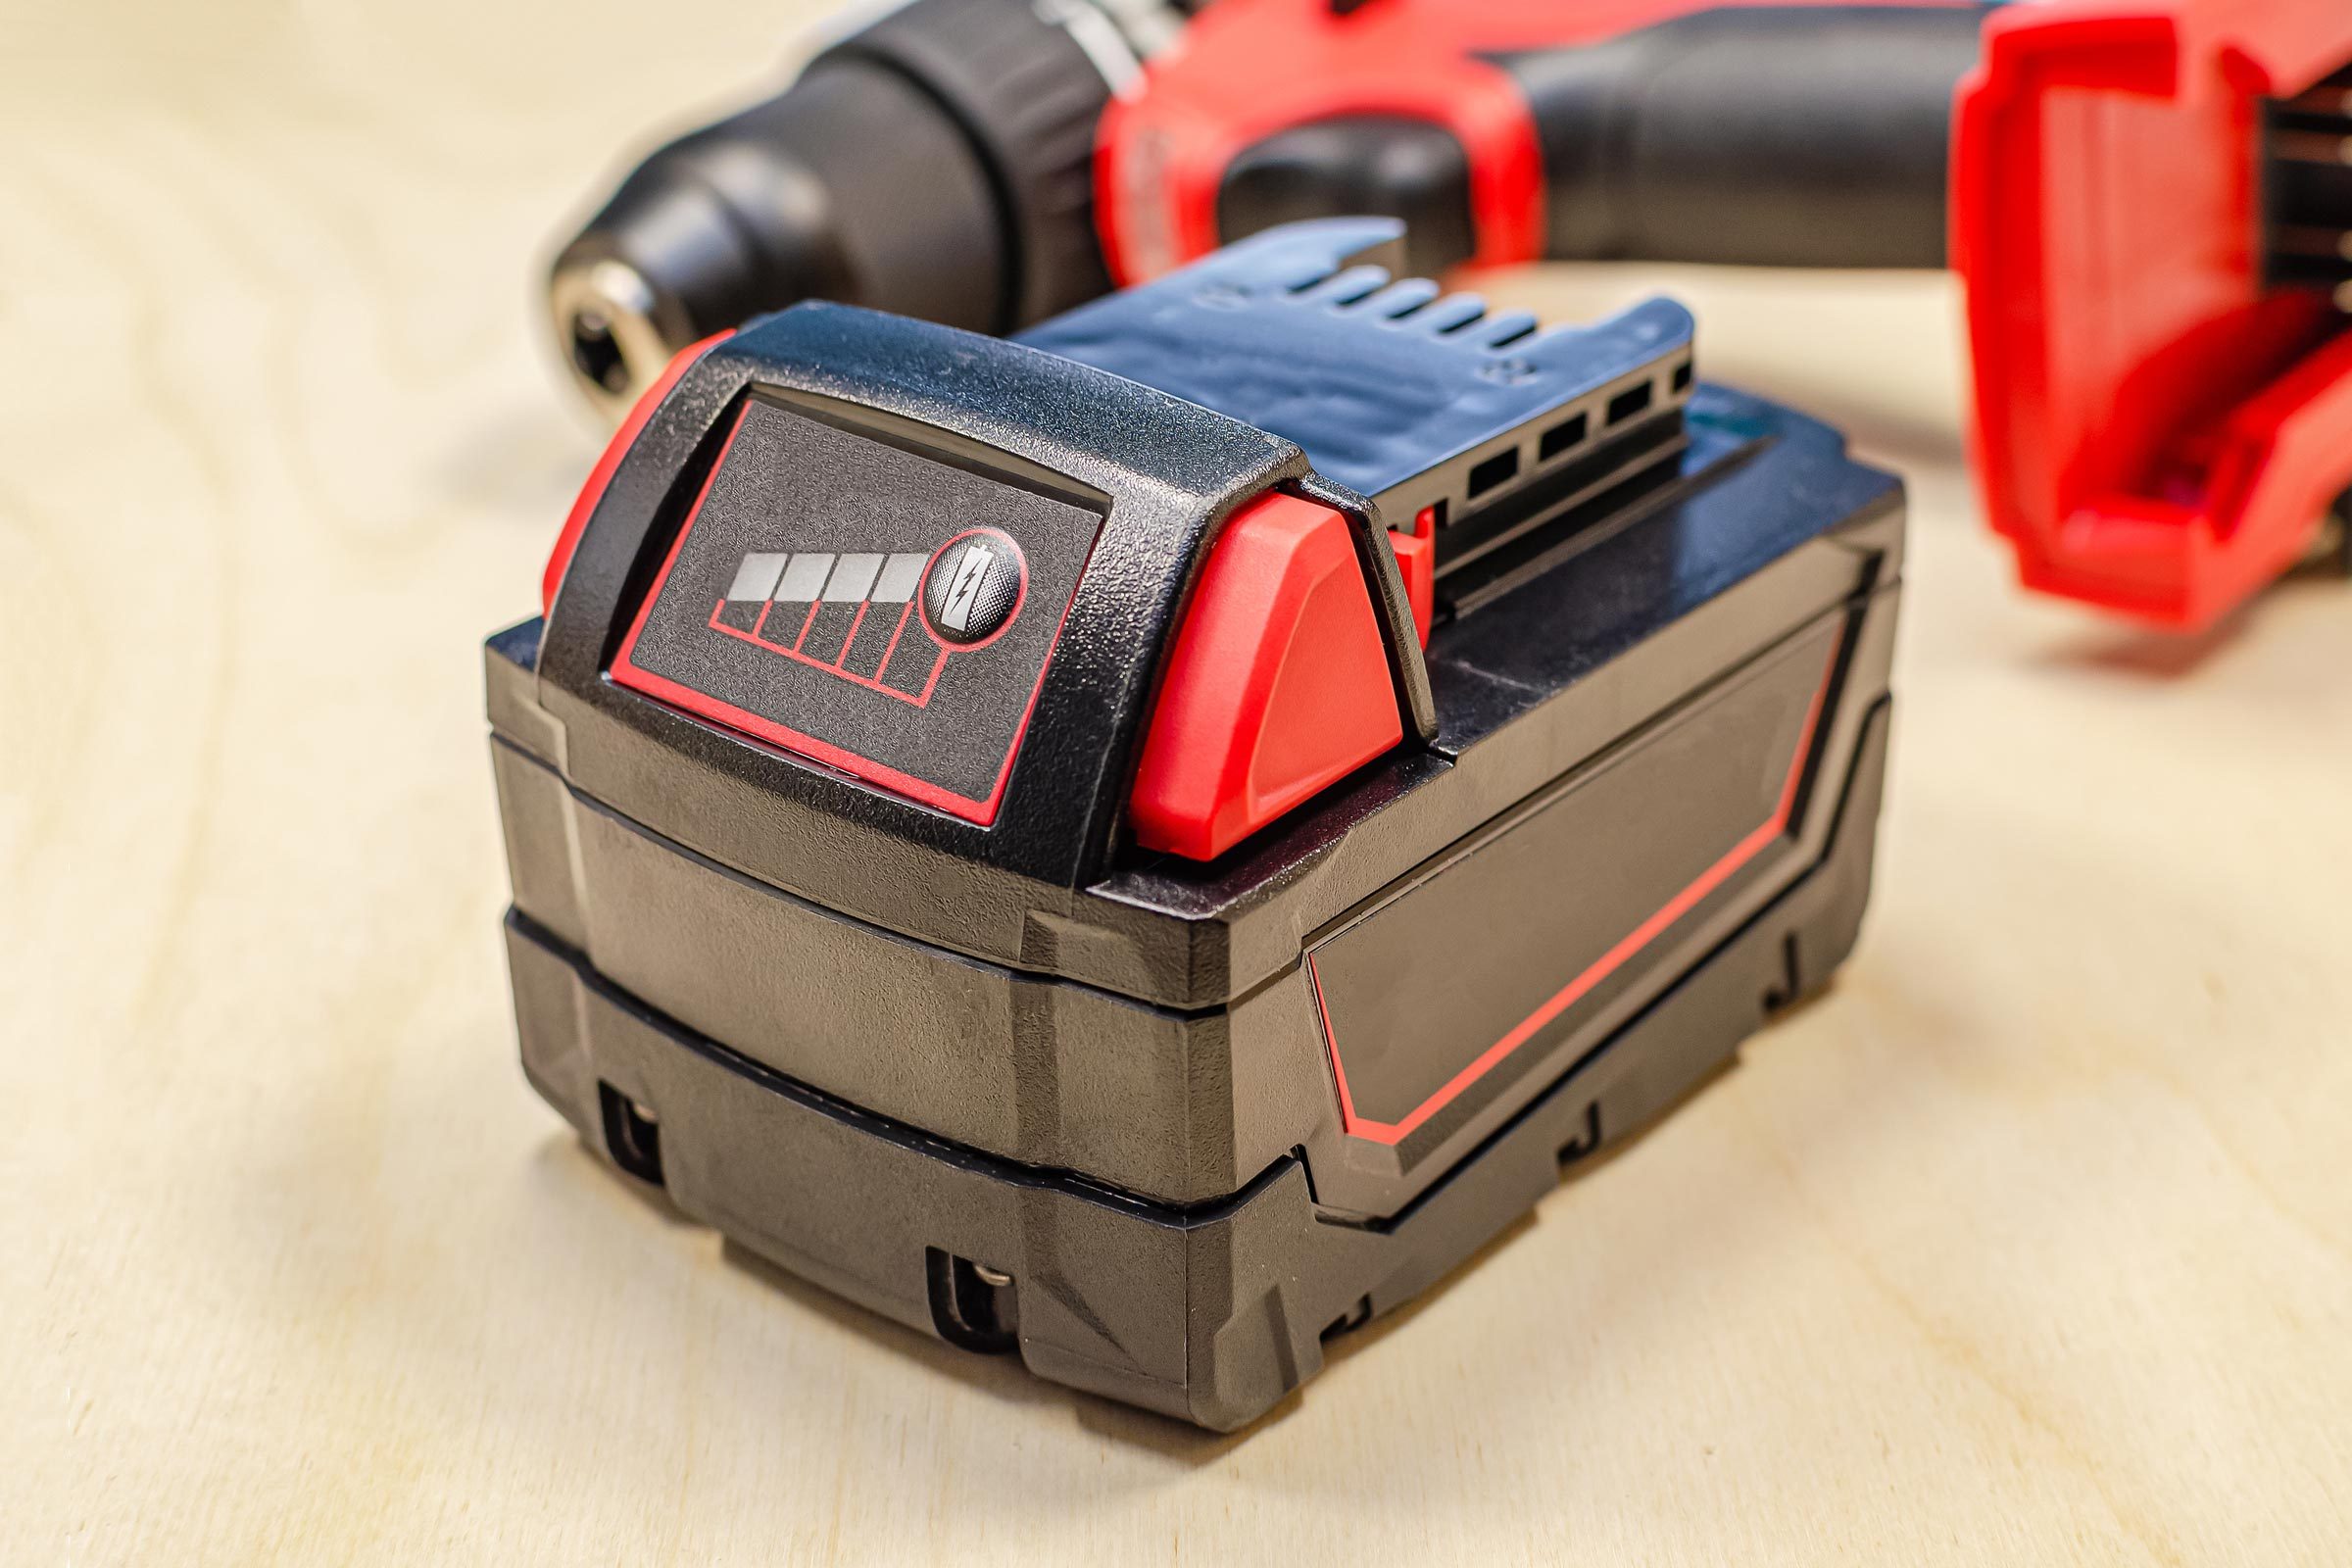 Black & Decker Gives Cordless Power Tools a Much-Needed Boost